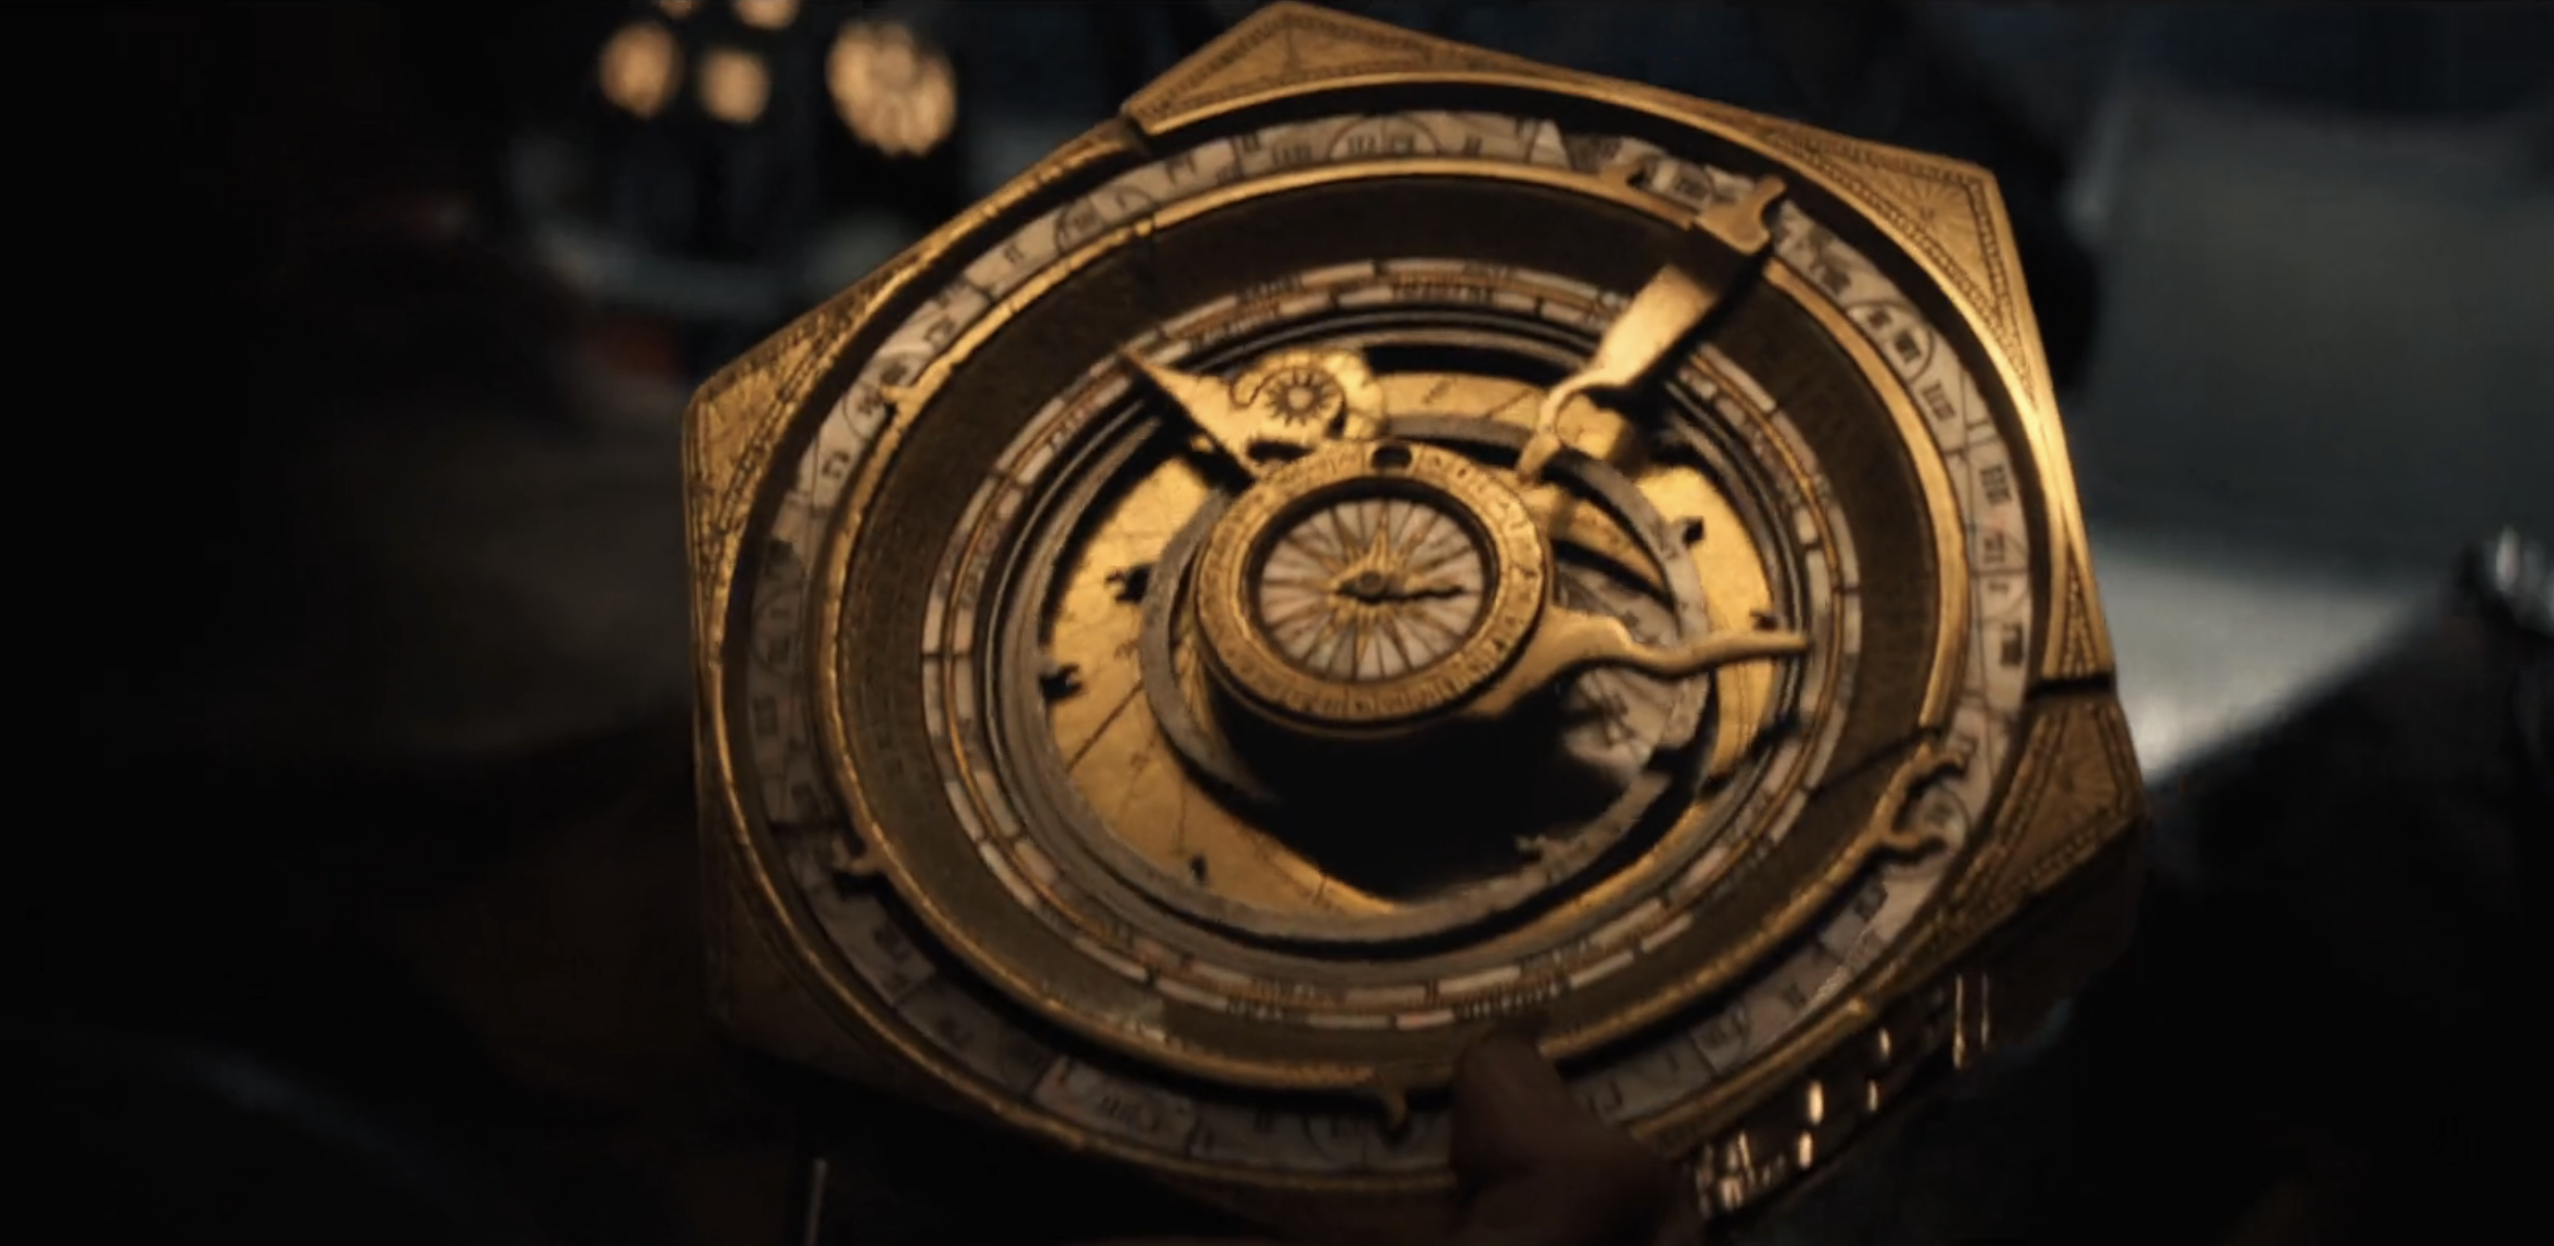 SEE IT: A New Trailer For ‘Indiana Jones and the Dial of Destiny’ Debuts At Star Wars Celebration